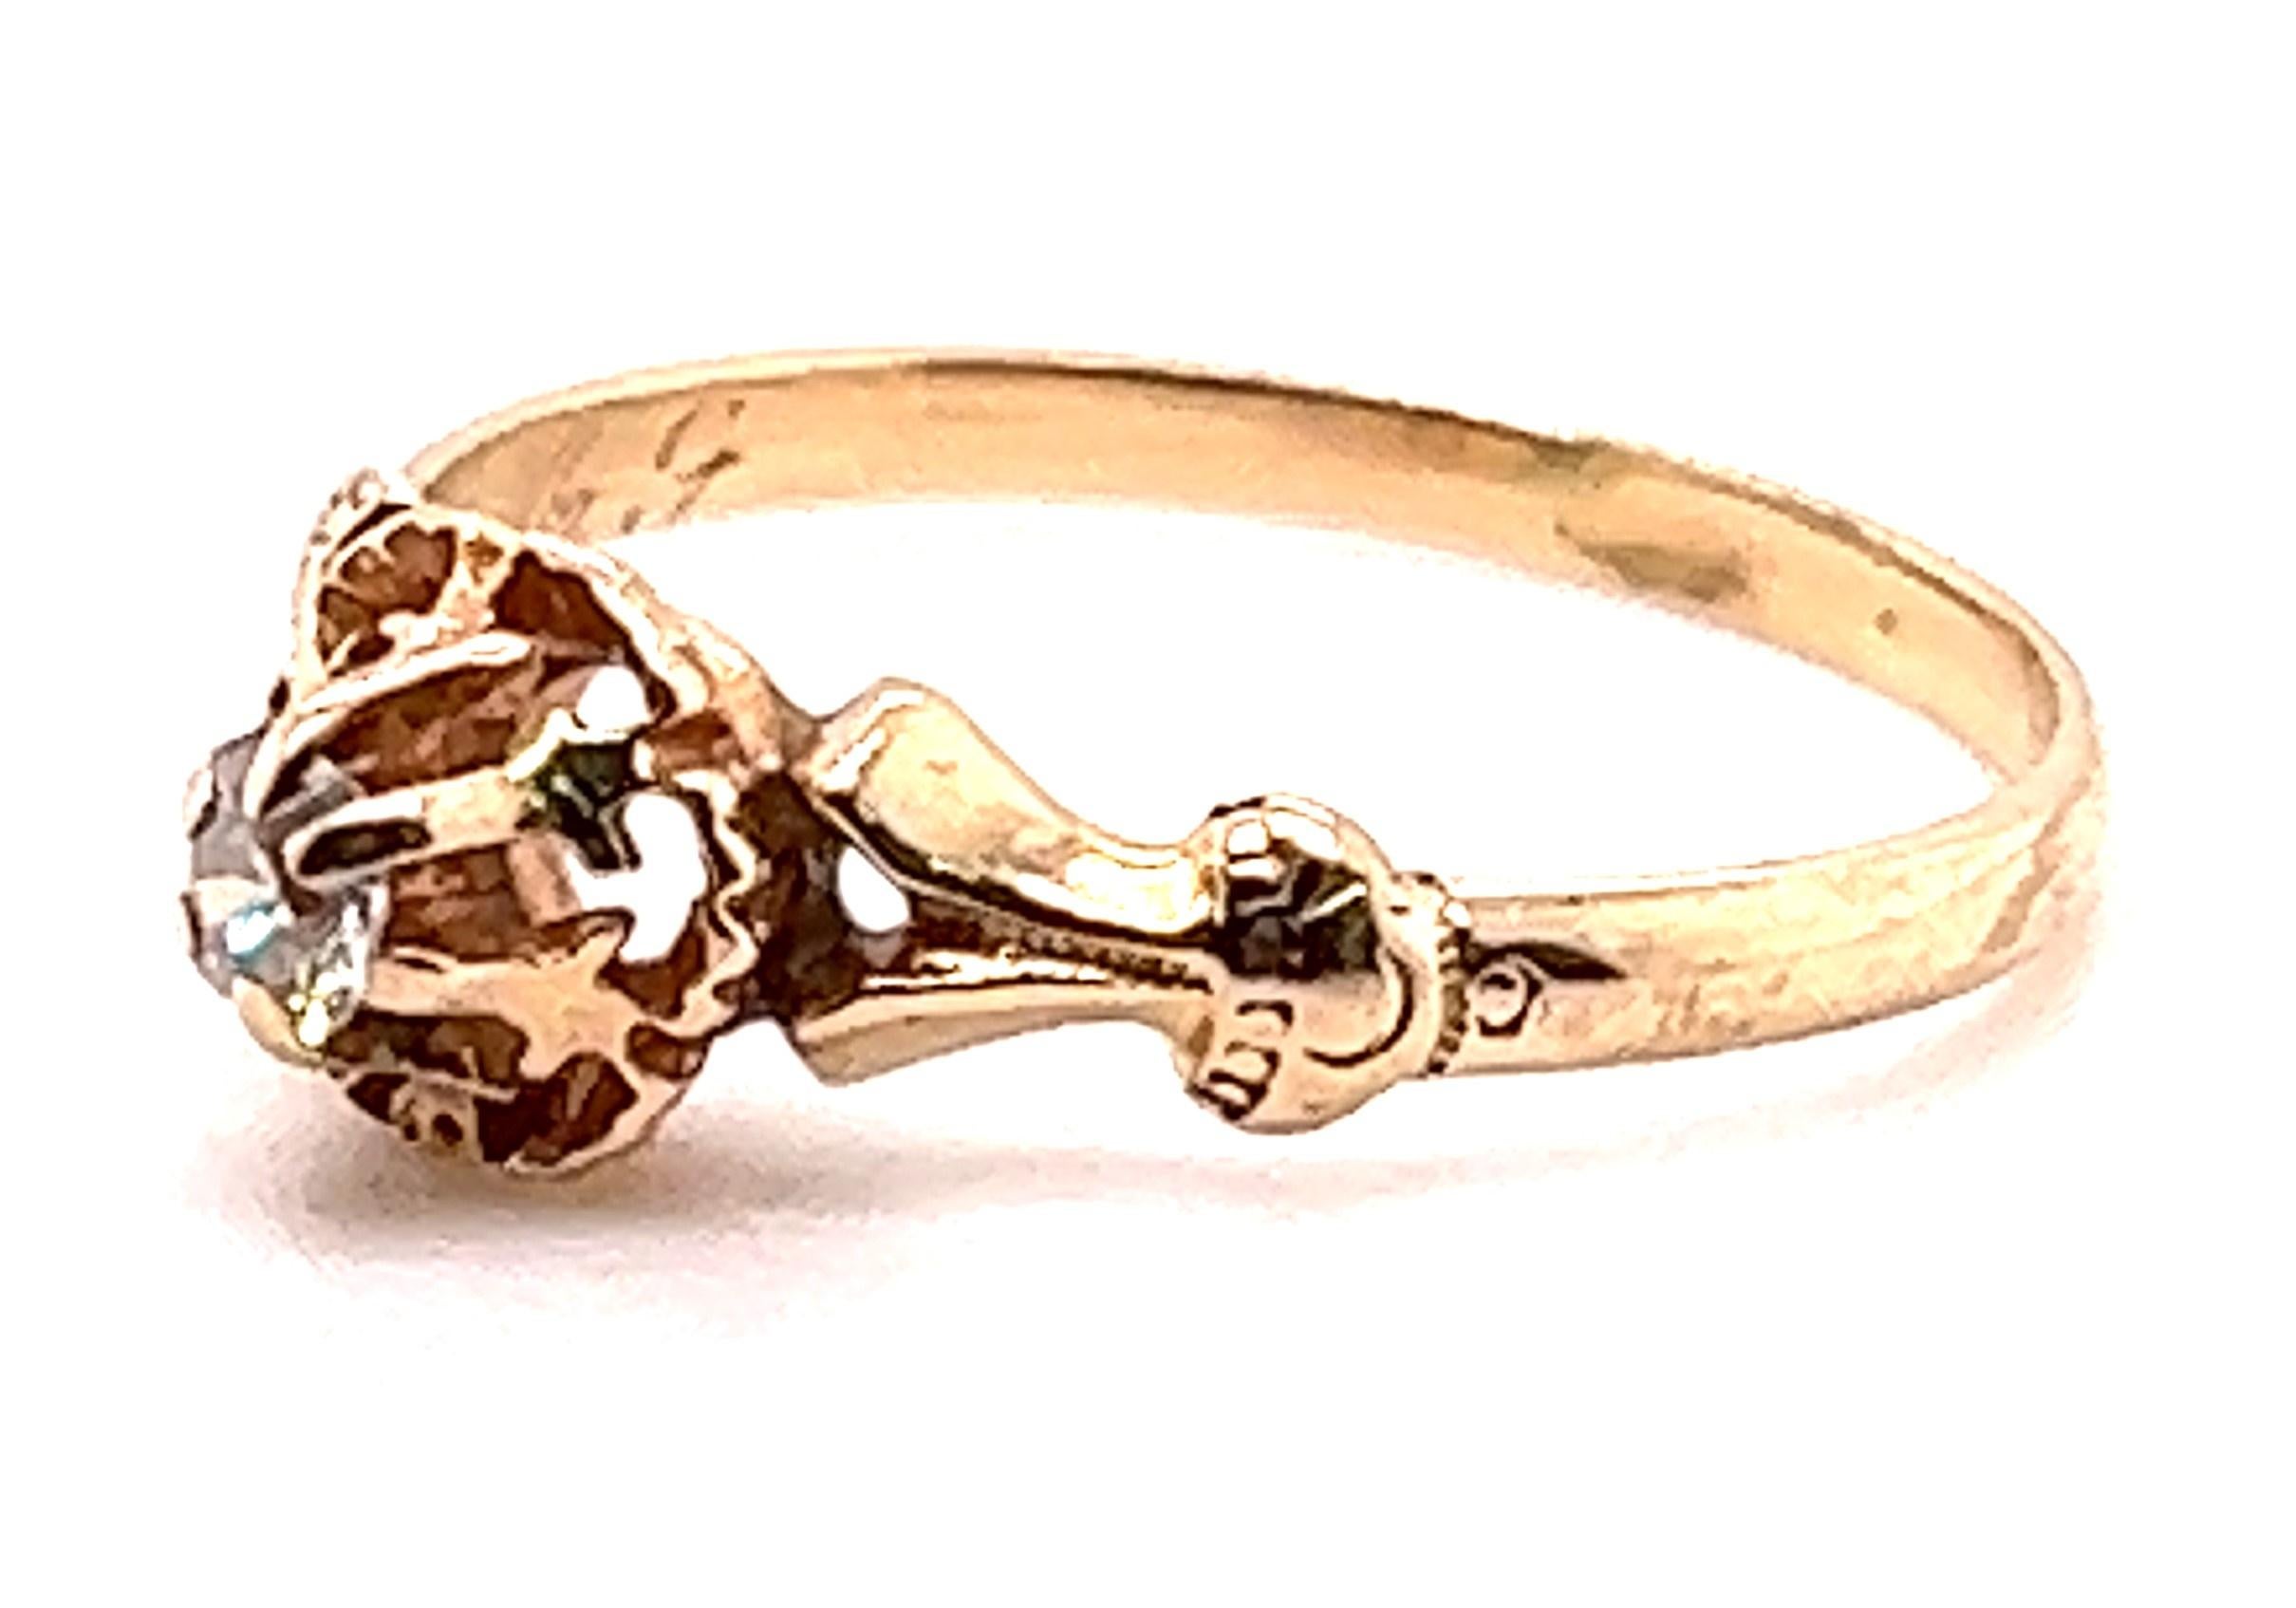 14kt yellow gold late Victorian ring with a 6-prong Belcher type setting for a .15 carat Old Mine Cut Diamond. The diamond possesses I-J color and SI1-SI2 clarity. 

The ring measures 5/8 inch from shoulder to shoulder and the head measures 1/4 inch